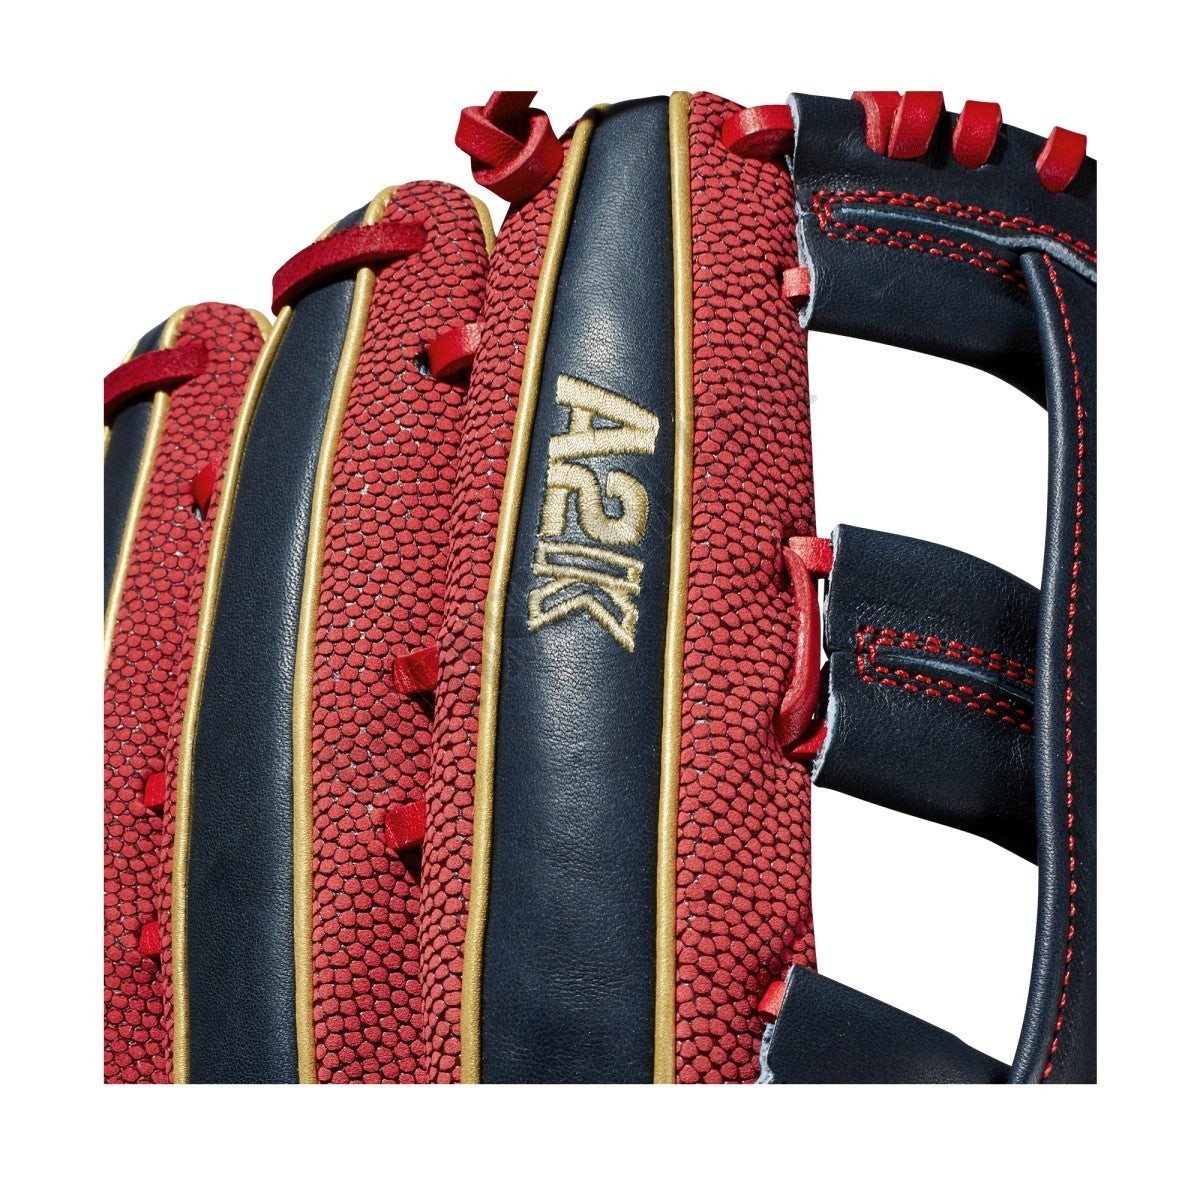 2020 A2K MB50 SuperSkin GM 12.5" Outfield Baseball Glove ● Wilson Promotions - -7